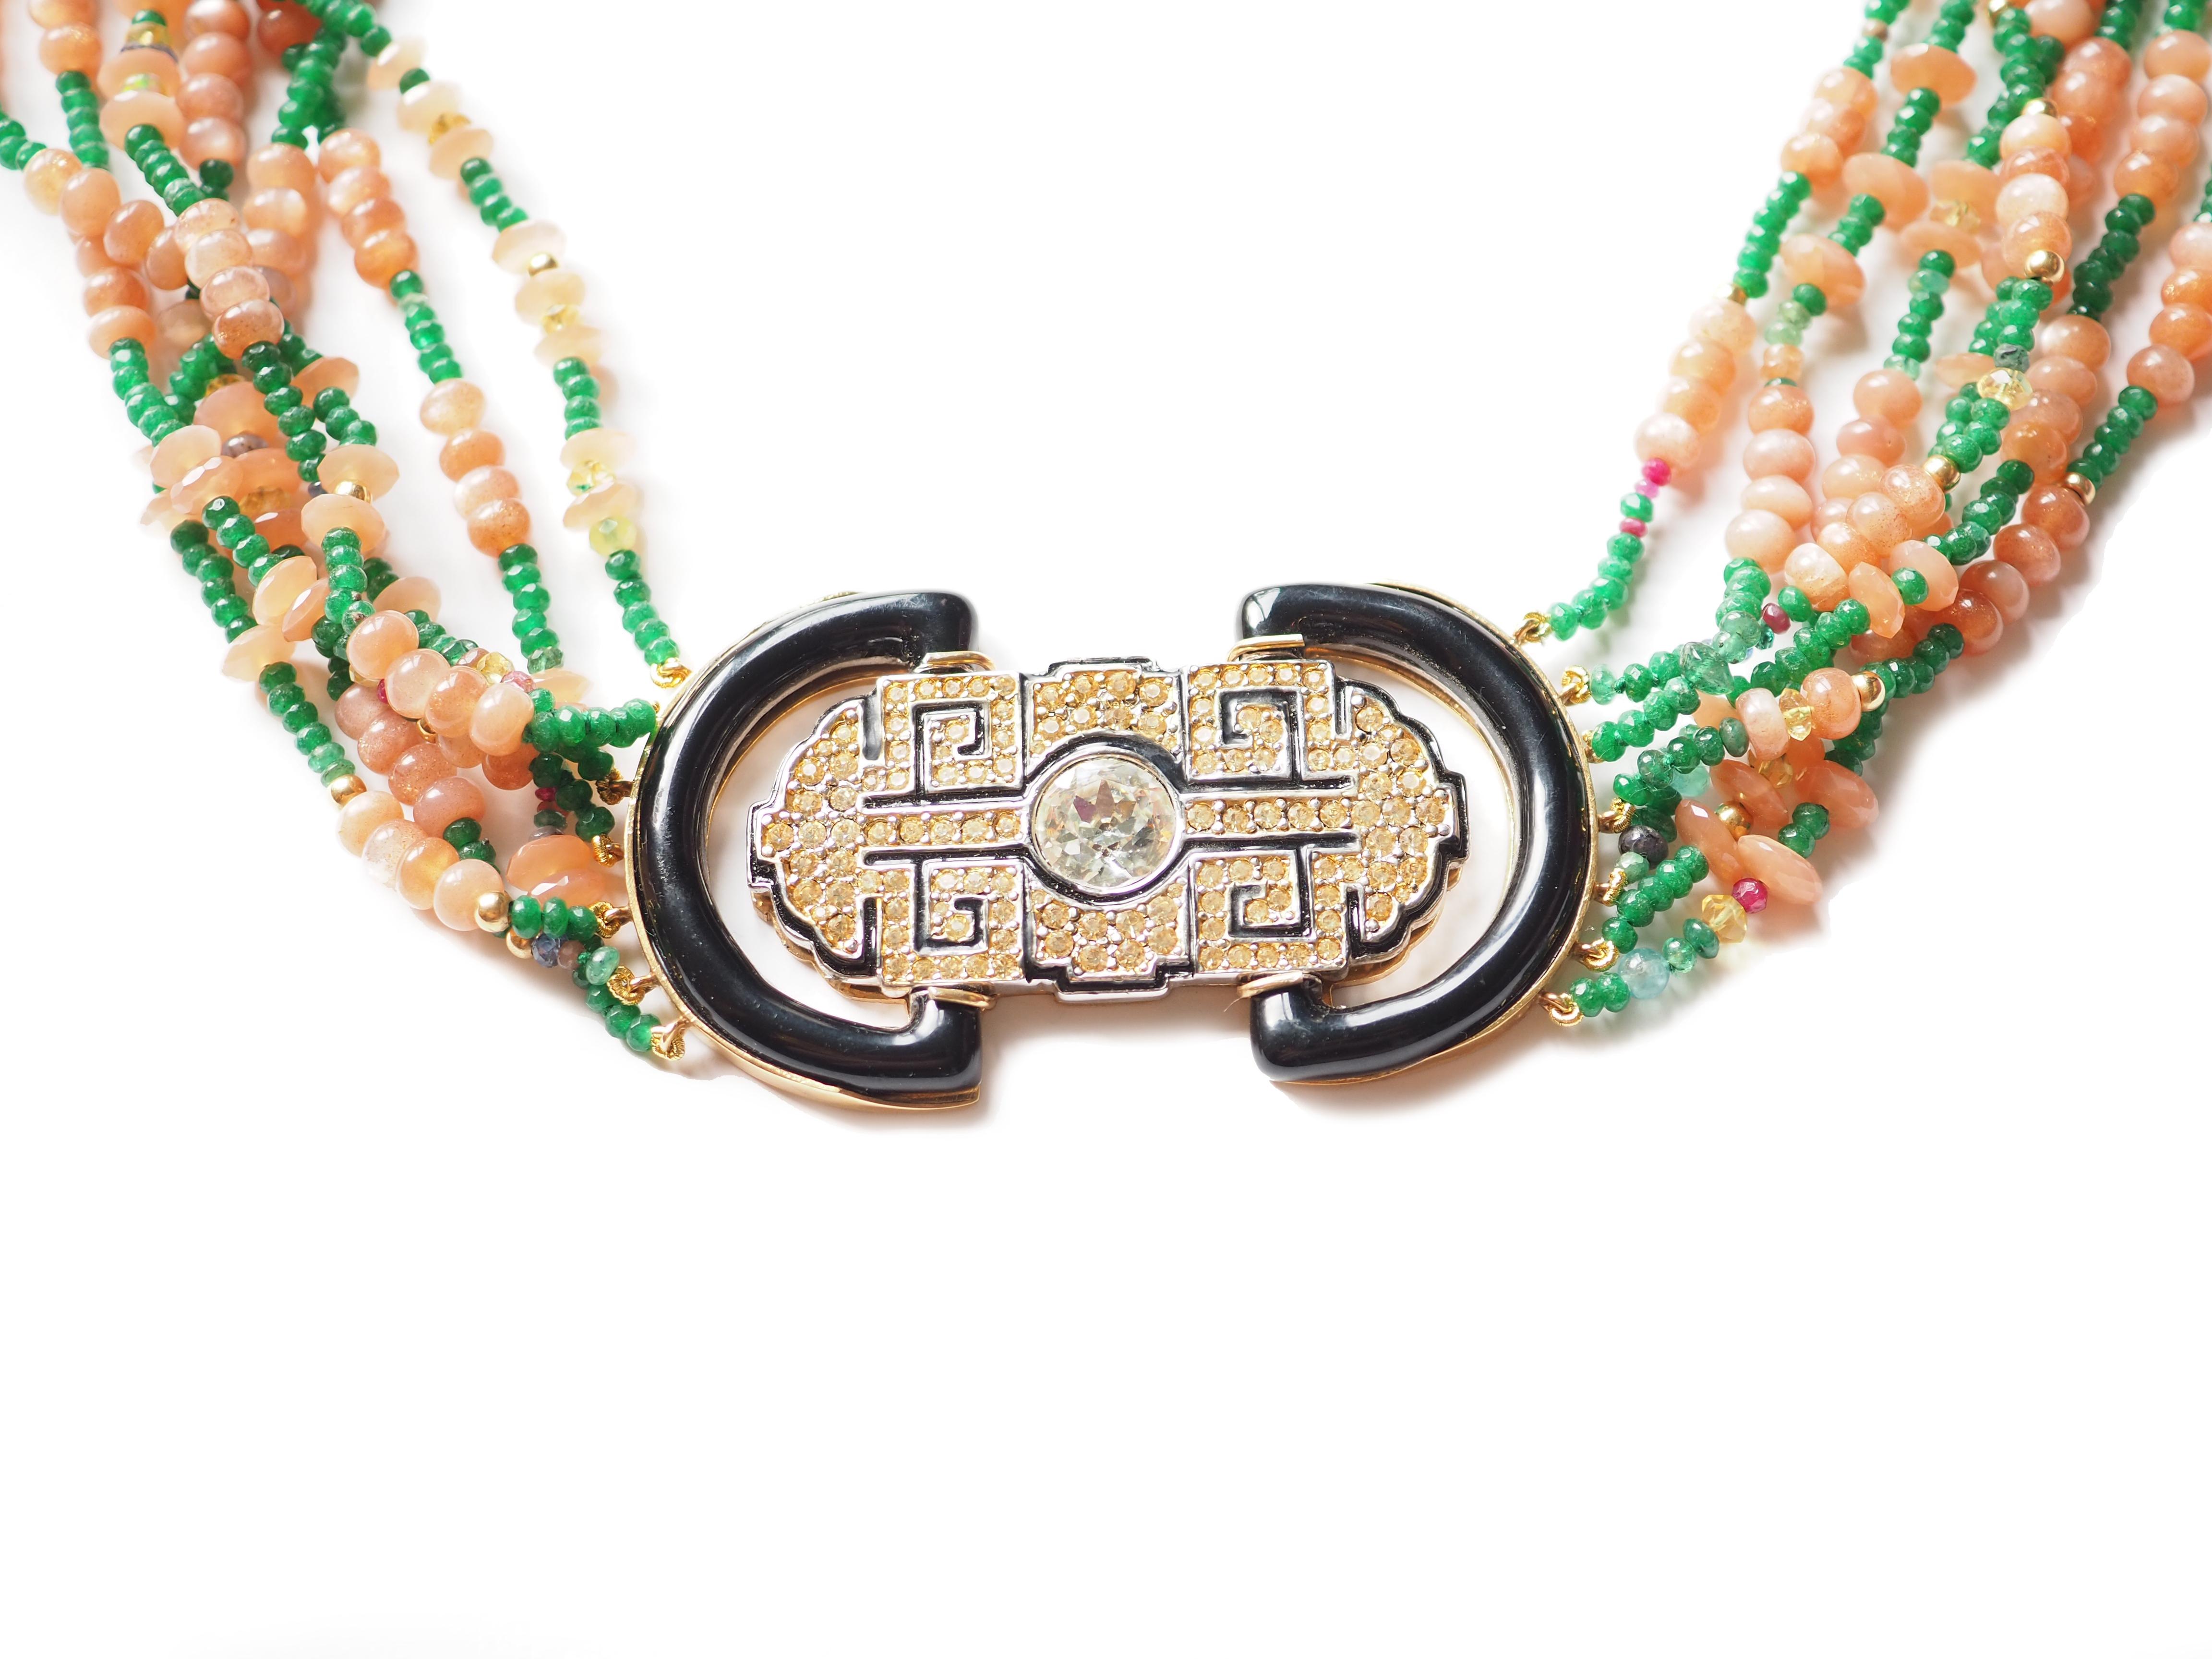 Long necklace Opal Emerald Antique Decò Broches with enamel and zircon. Length approximately 65 cm.
All Giulia Colussi jewelry is new and has never been previously owned or worn. Each item will arrive at your door beautifully gift wrapped in our